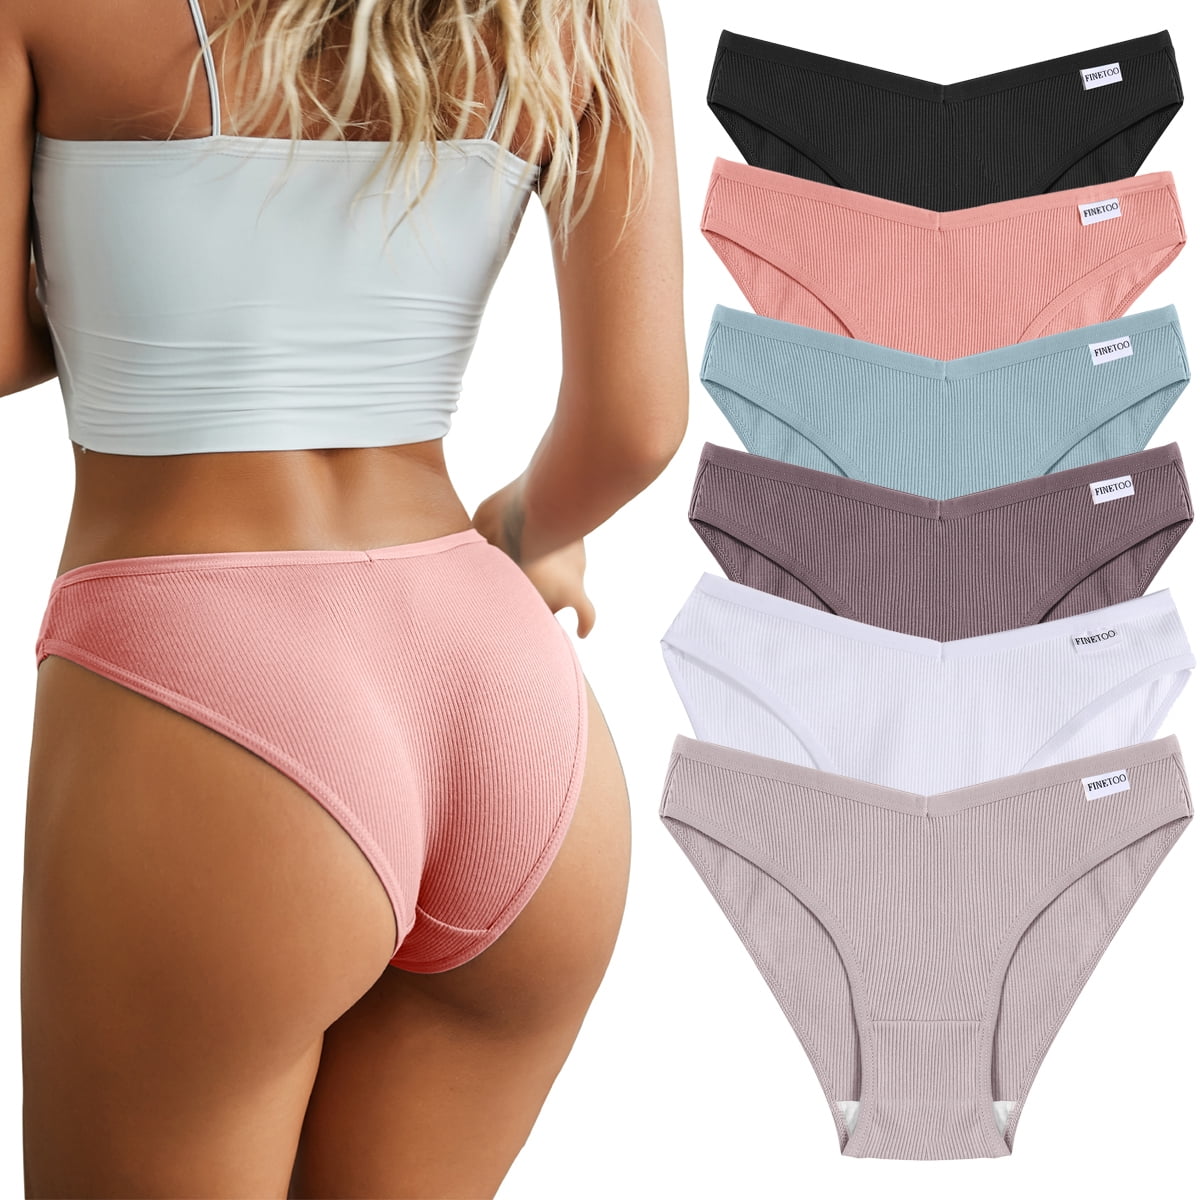 FINETOO 9 Pack Cotton Underwear for Women Sexy Low Rise Ribbed